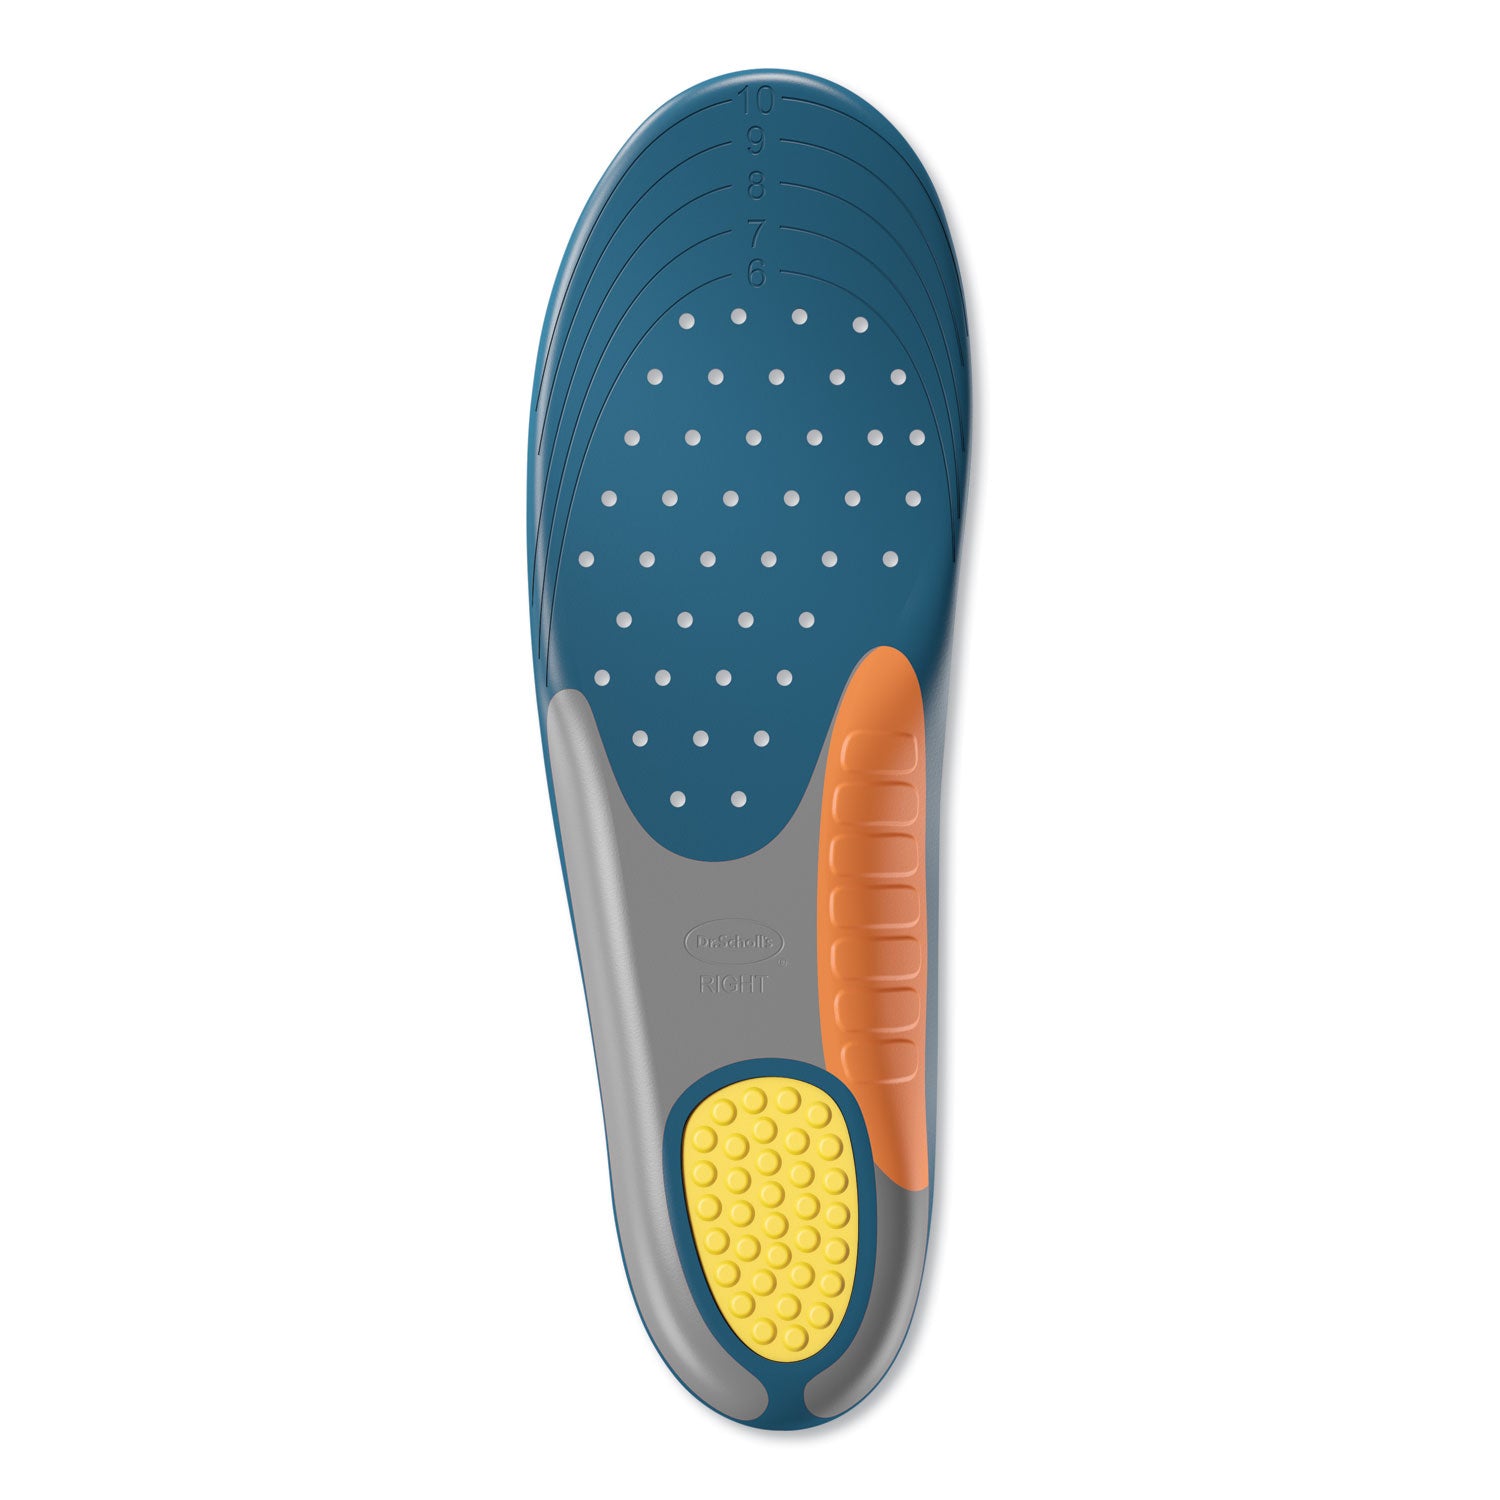 pain-relief-extra-support-orthotic-insoles-women-sizes-6-to-11-gray-blue-orange-yellow-pair_dsc59013 - 3